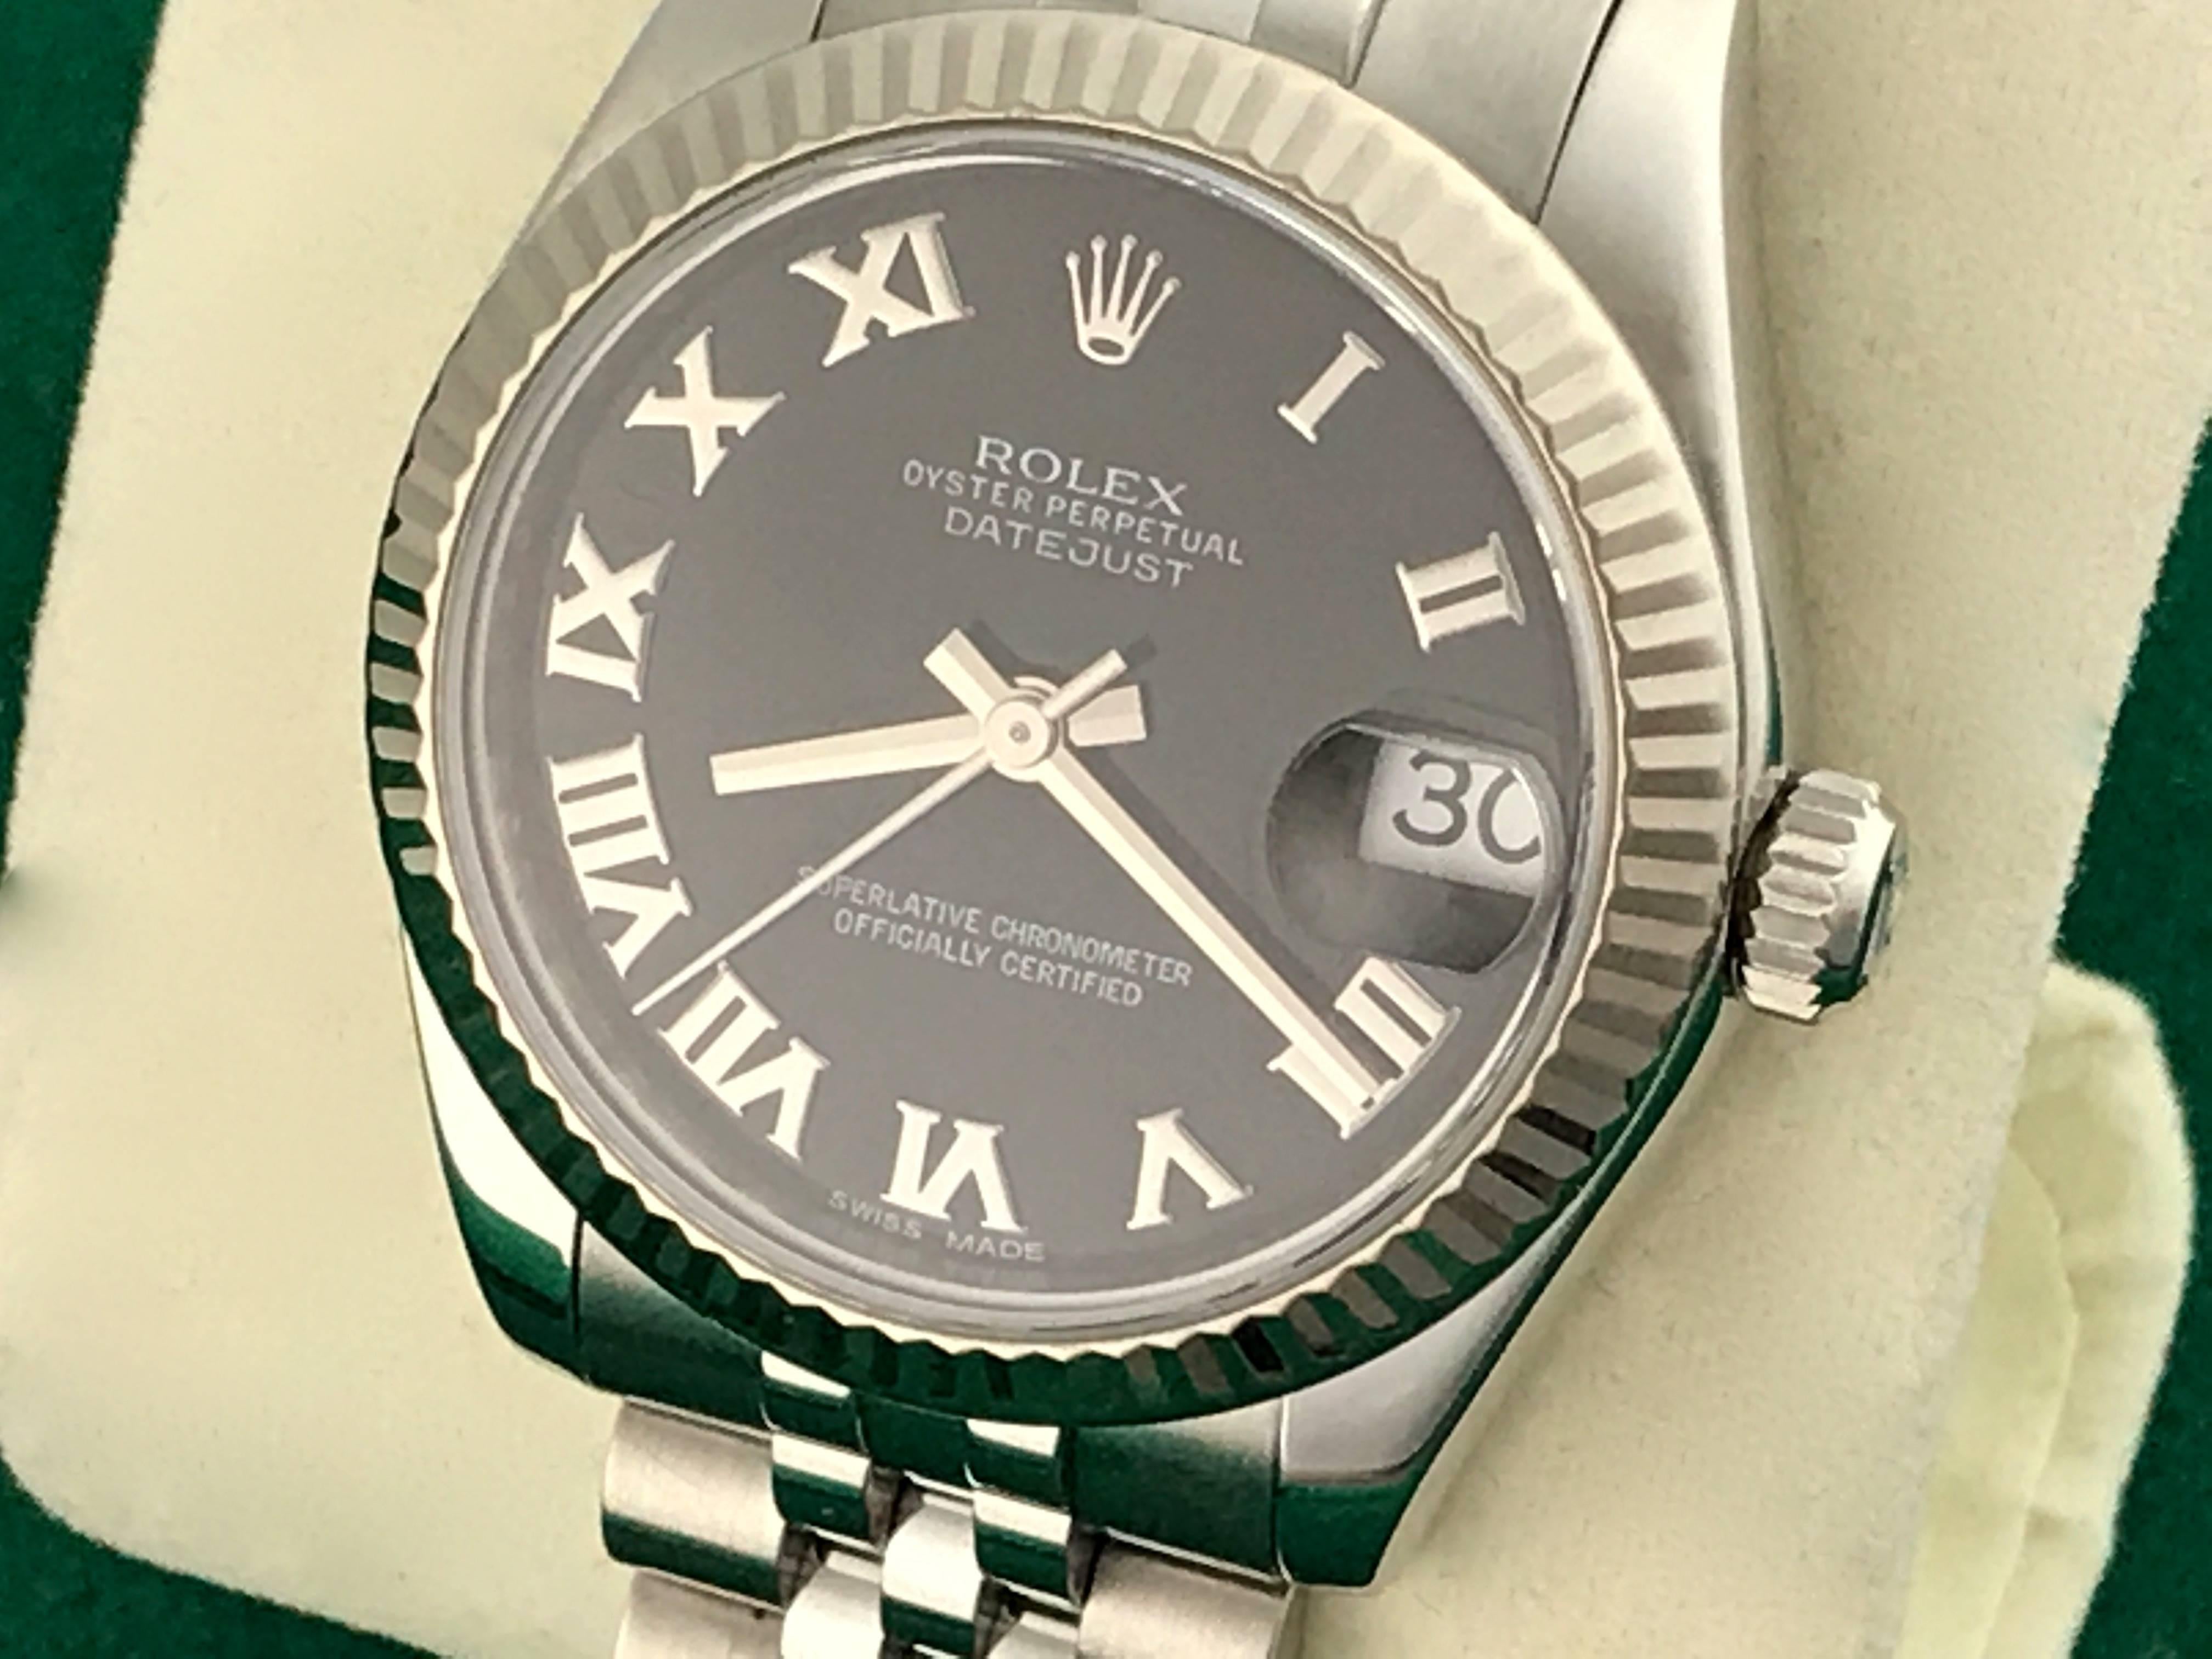 Rolex Datejust Model 178274 Stainless Steel Automatic Midsize Wrist Watch. Certified pre-owned and ready to ship.  Stainless Steel case with 18k white gold fluted bezel, 31mm diameter.  Stainless Steel jubilee bracelet. Black dial with polished